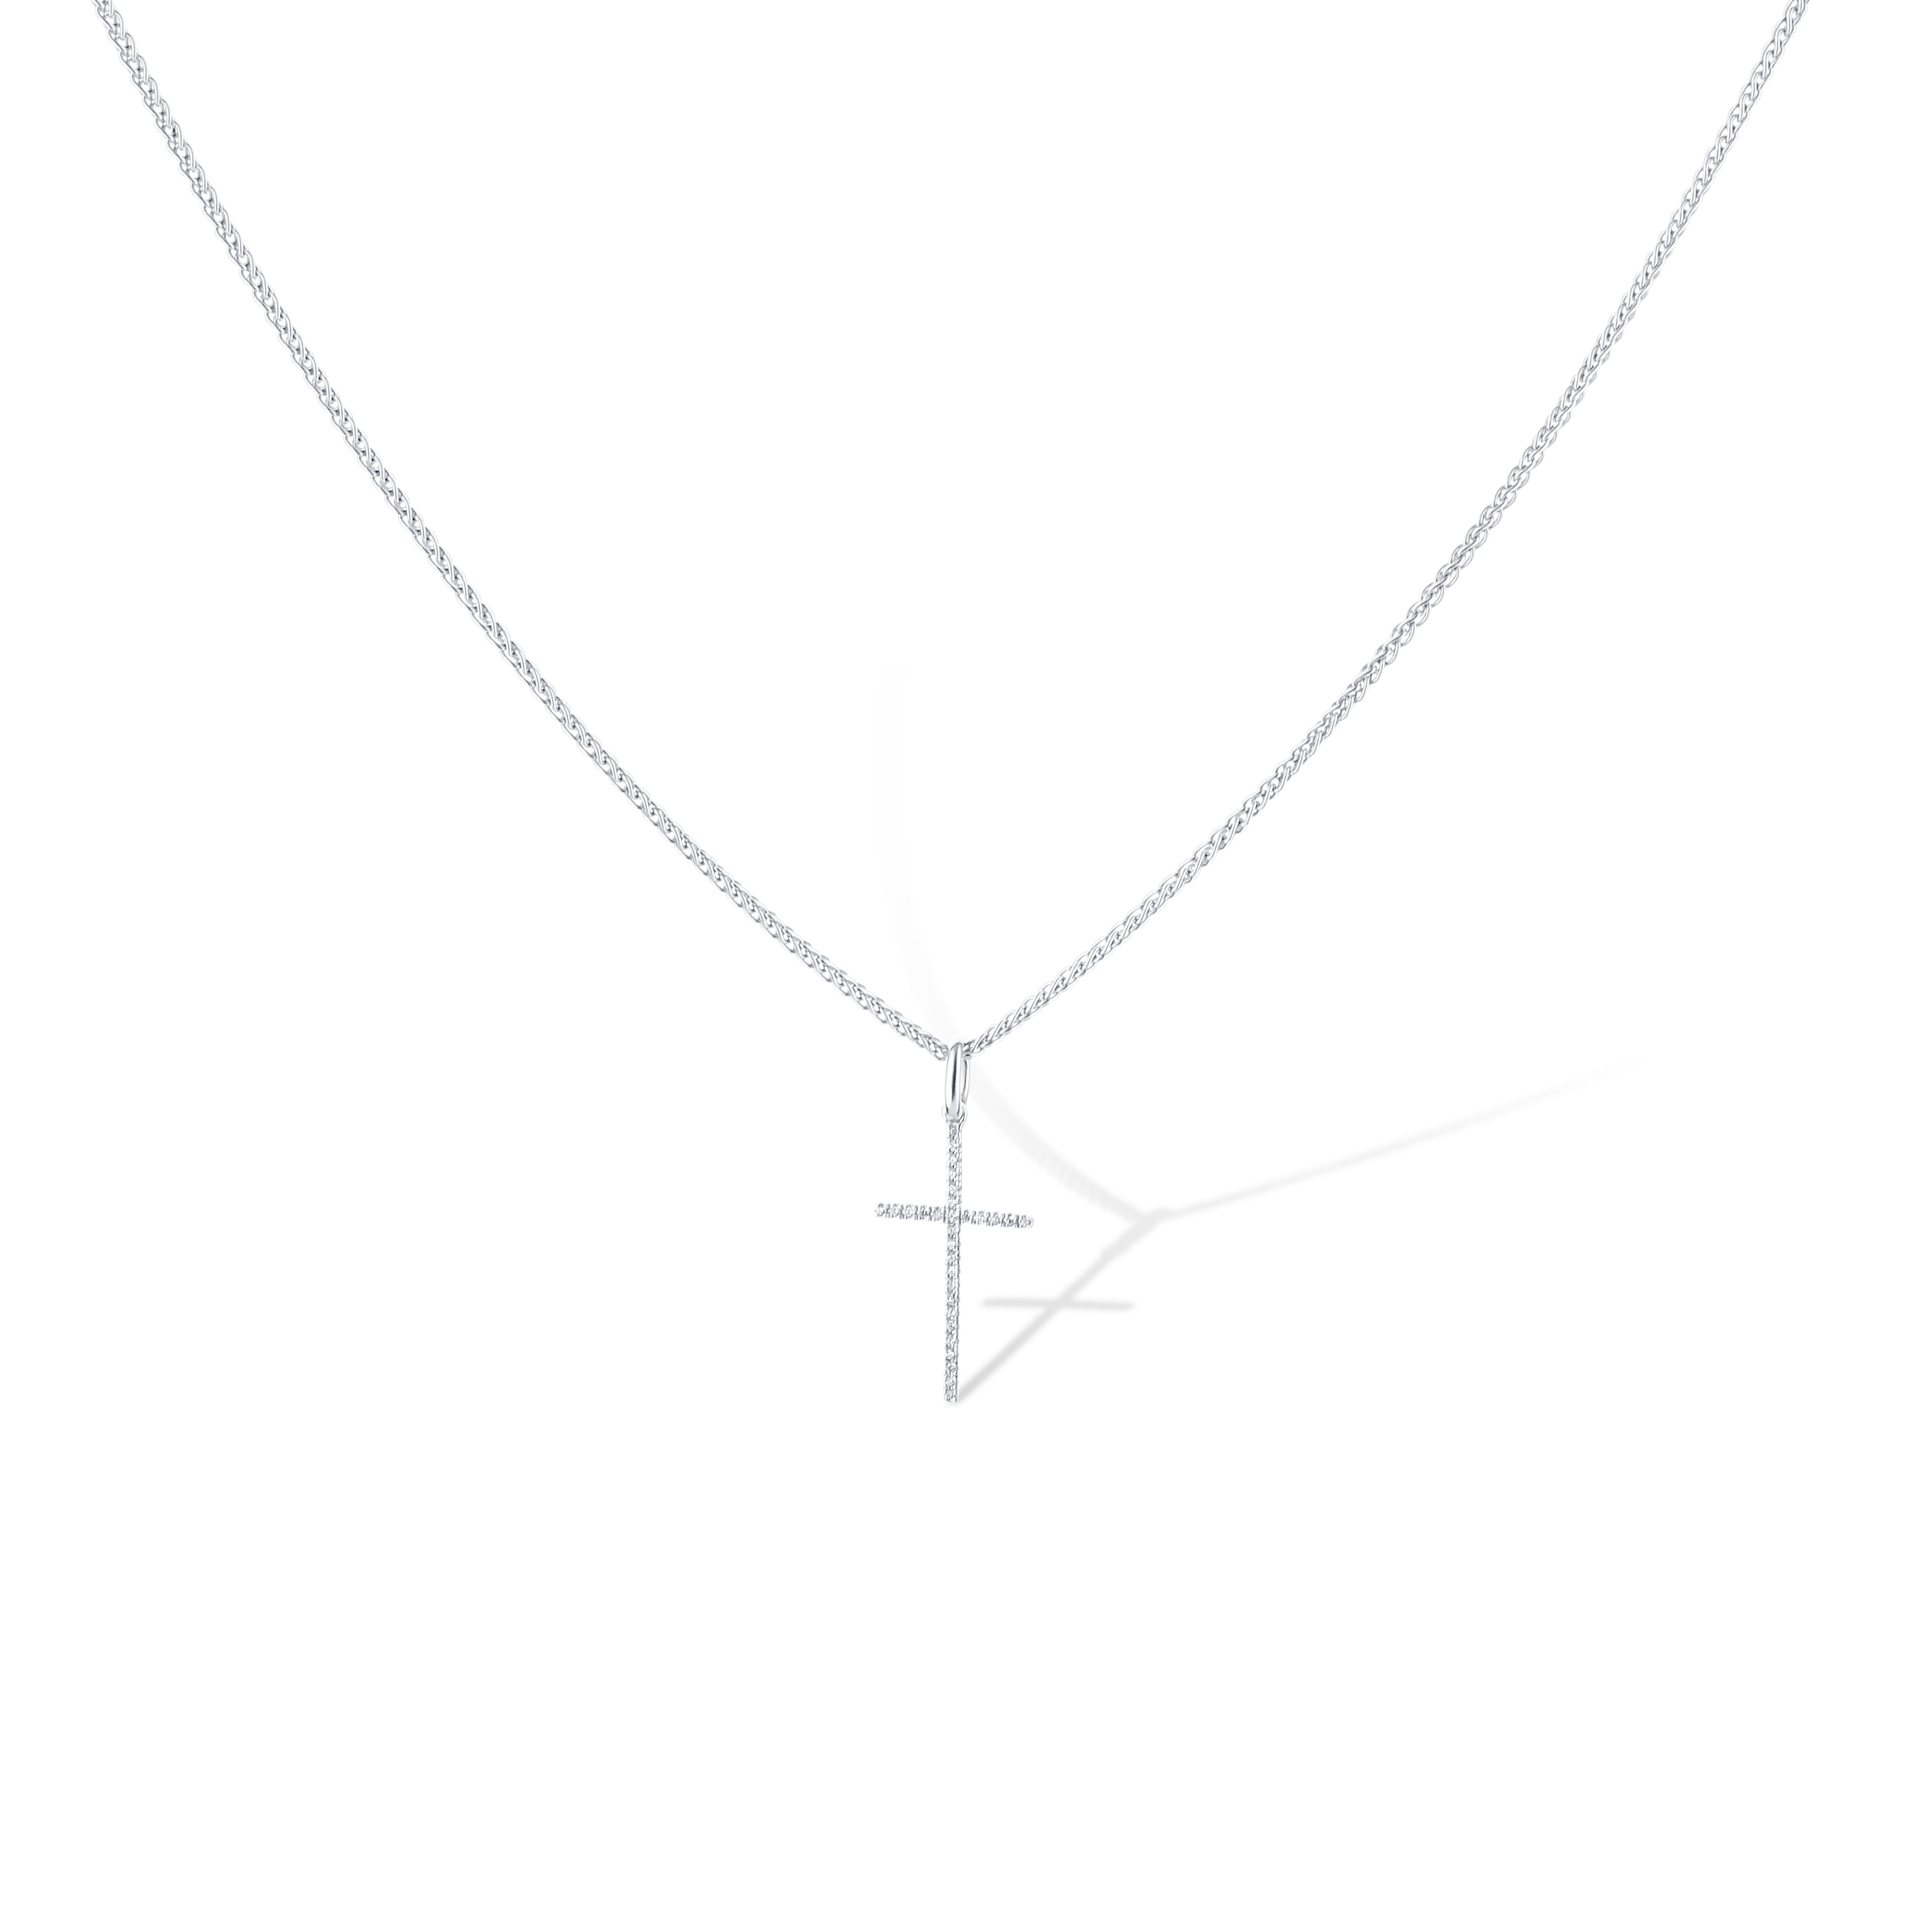 18K White Gold Diamond Cross Pendant Necklace With Wheat 16 Chain